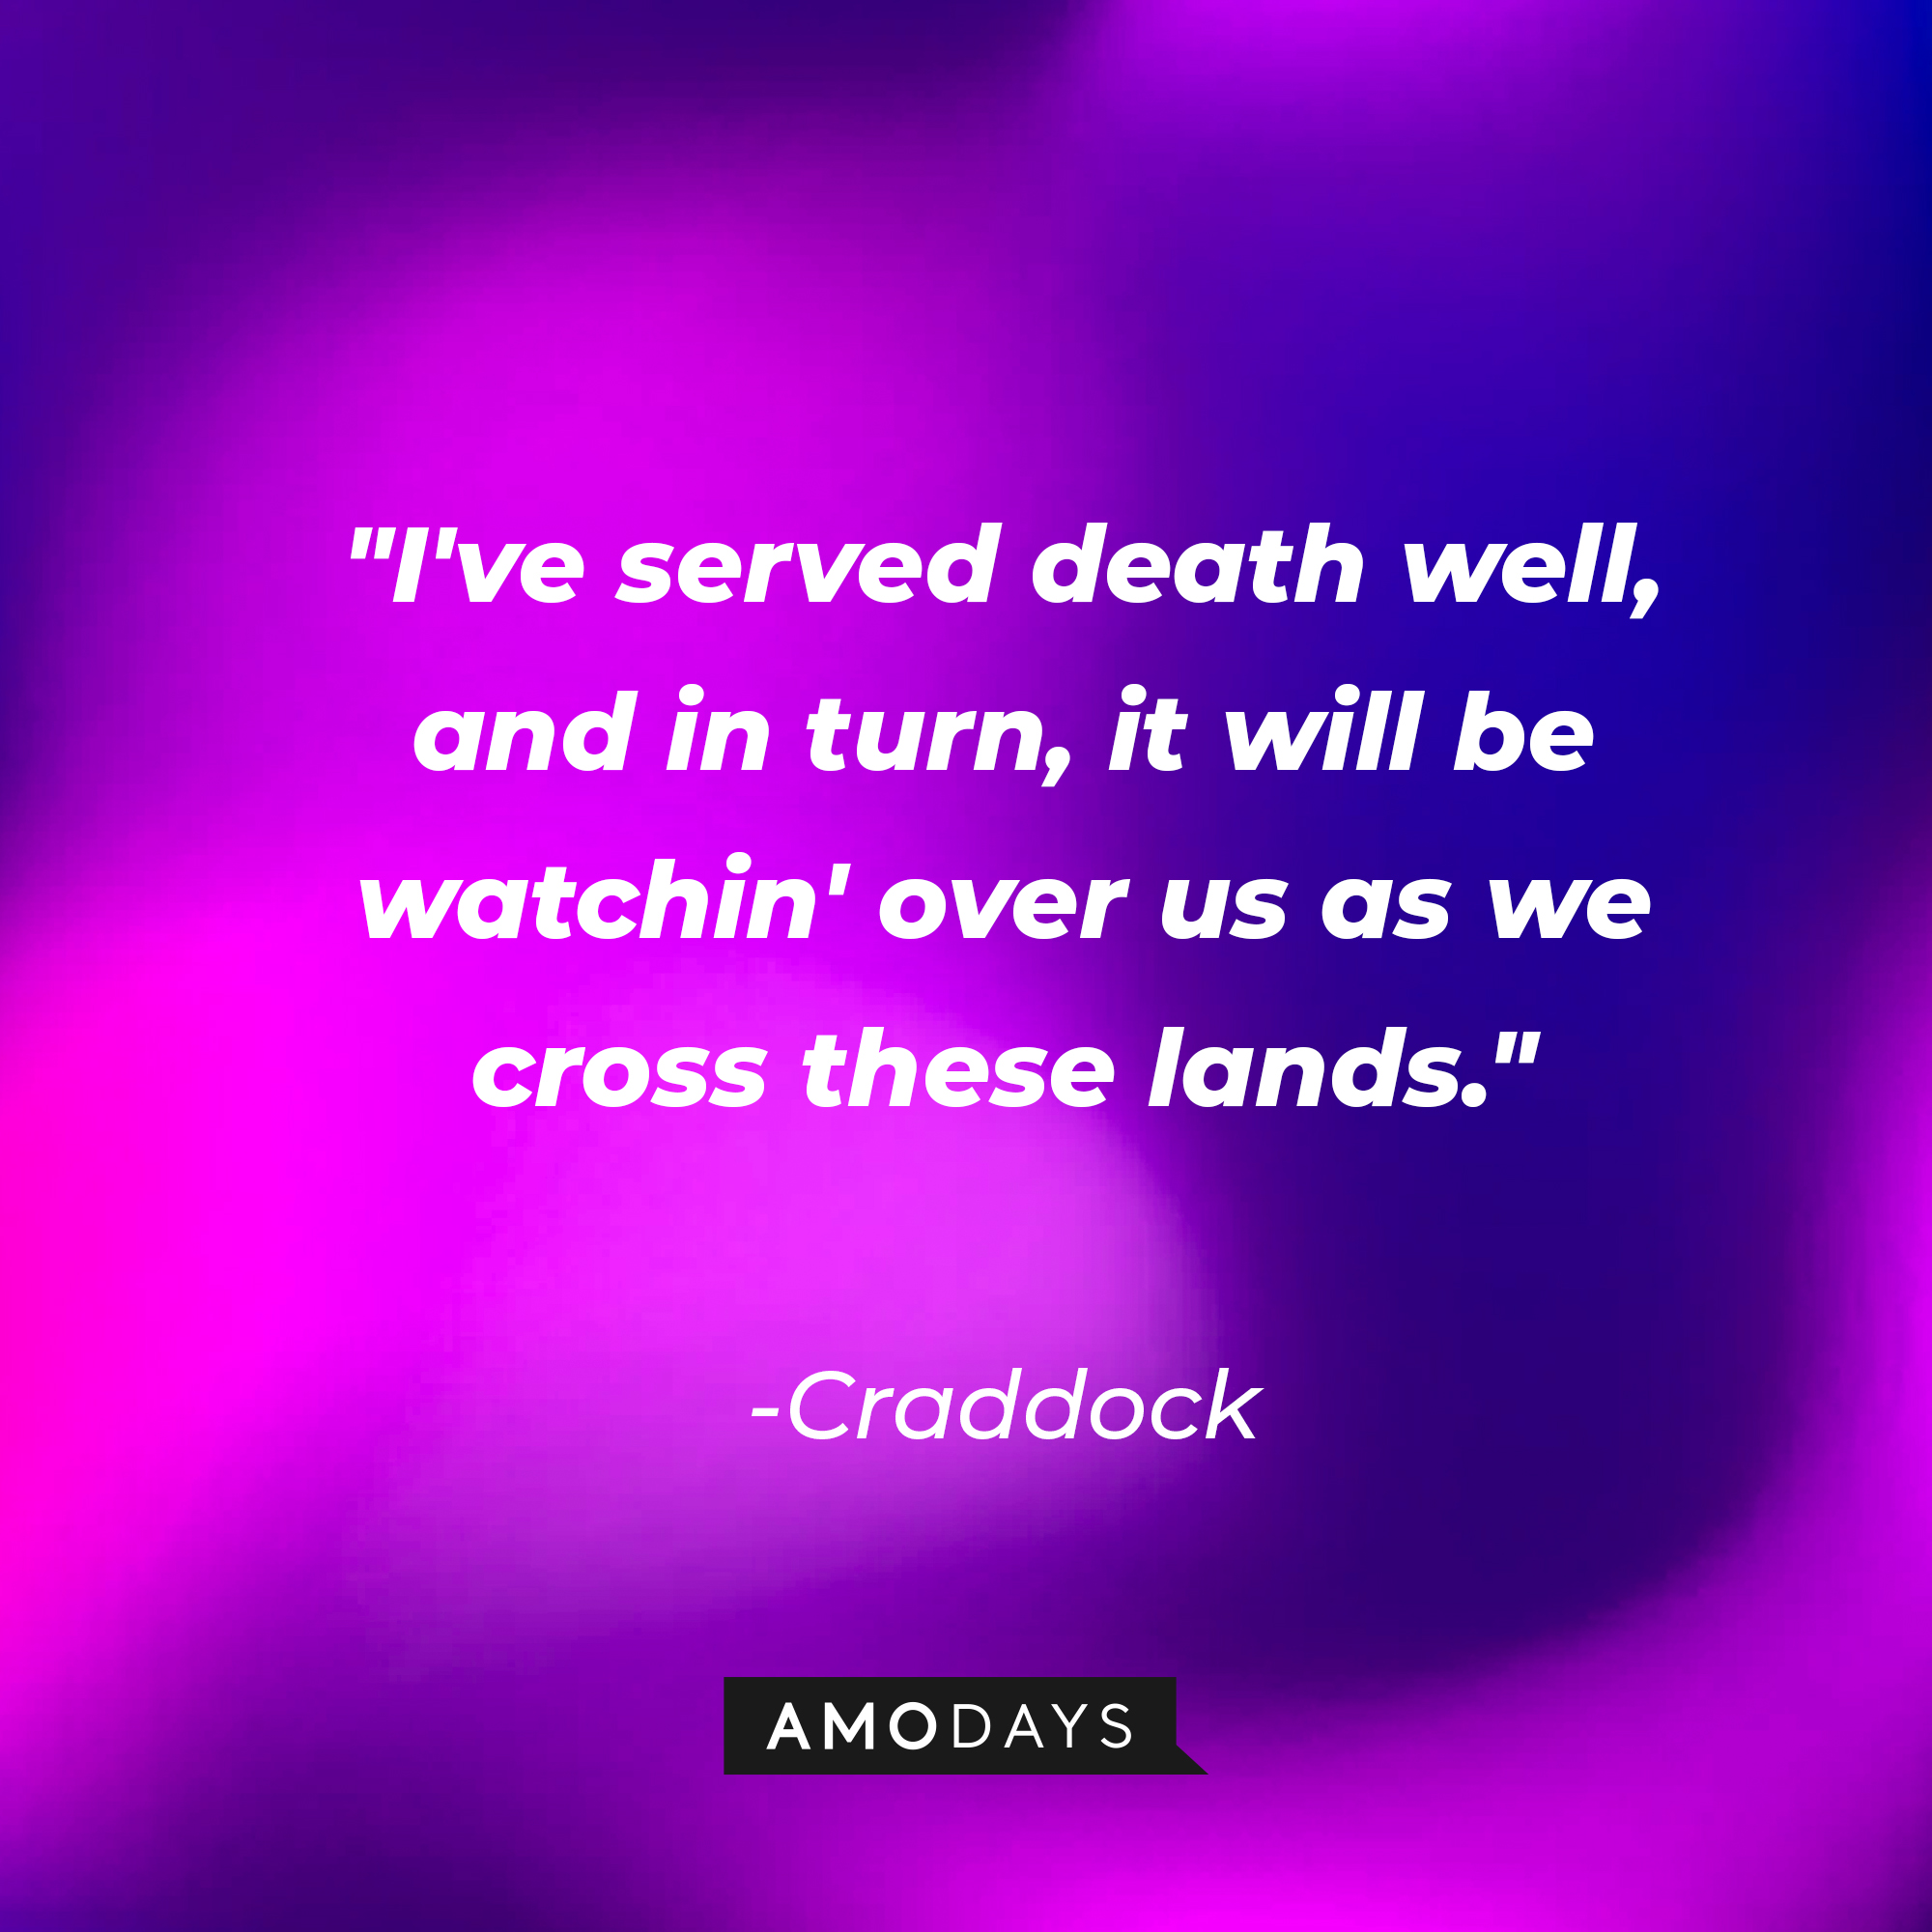 Craddock's quote: "I've served death well, and in turn, it will be watchin' over us as we cross these lands." | Source: AmoDays